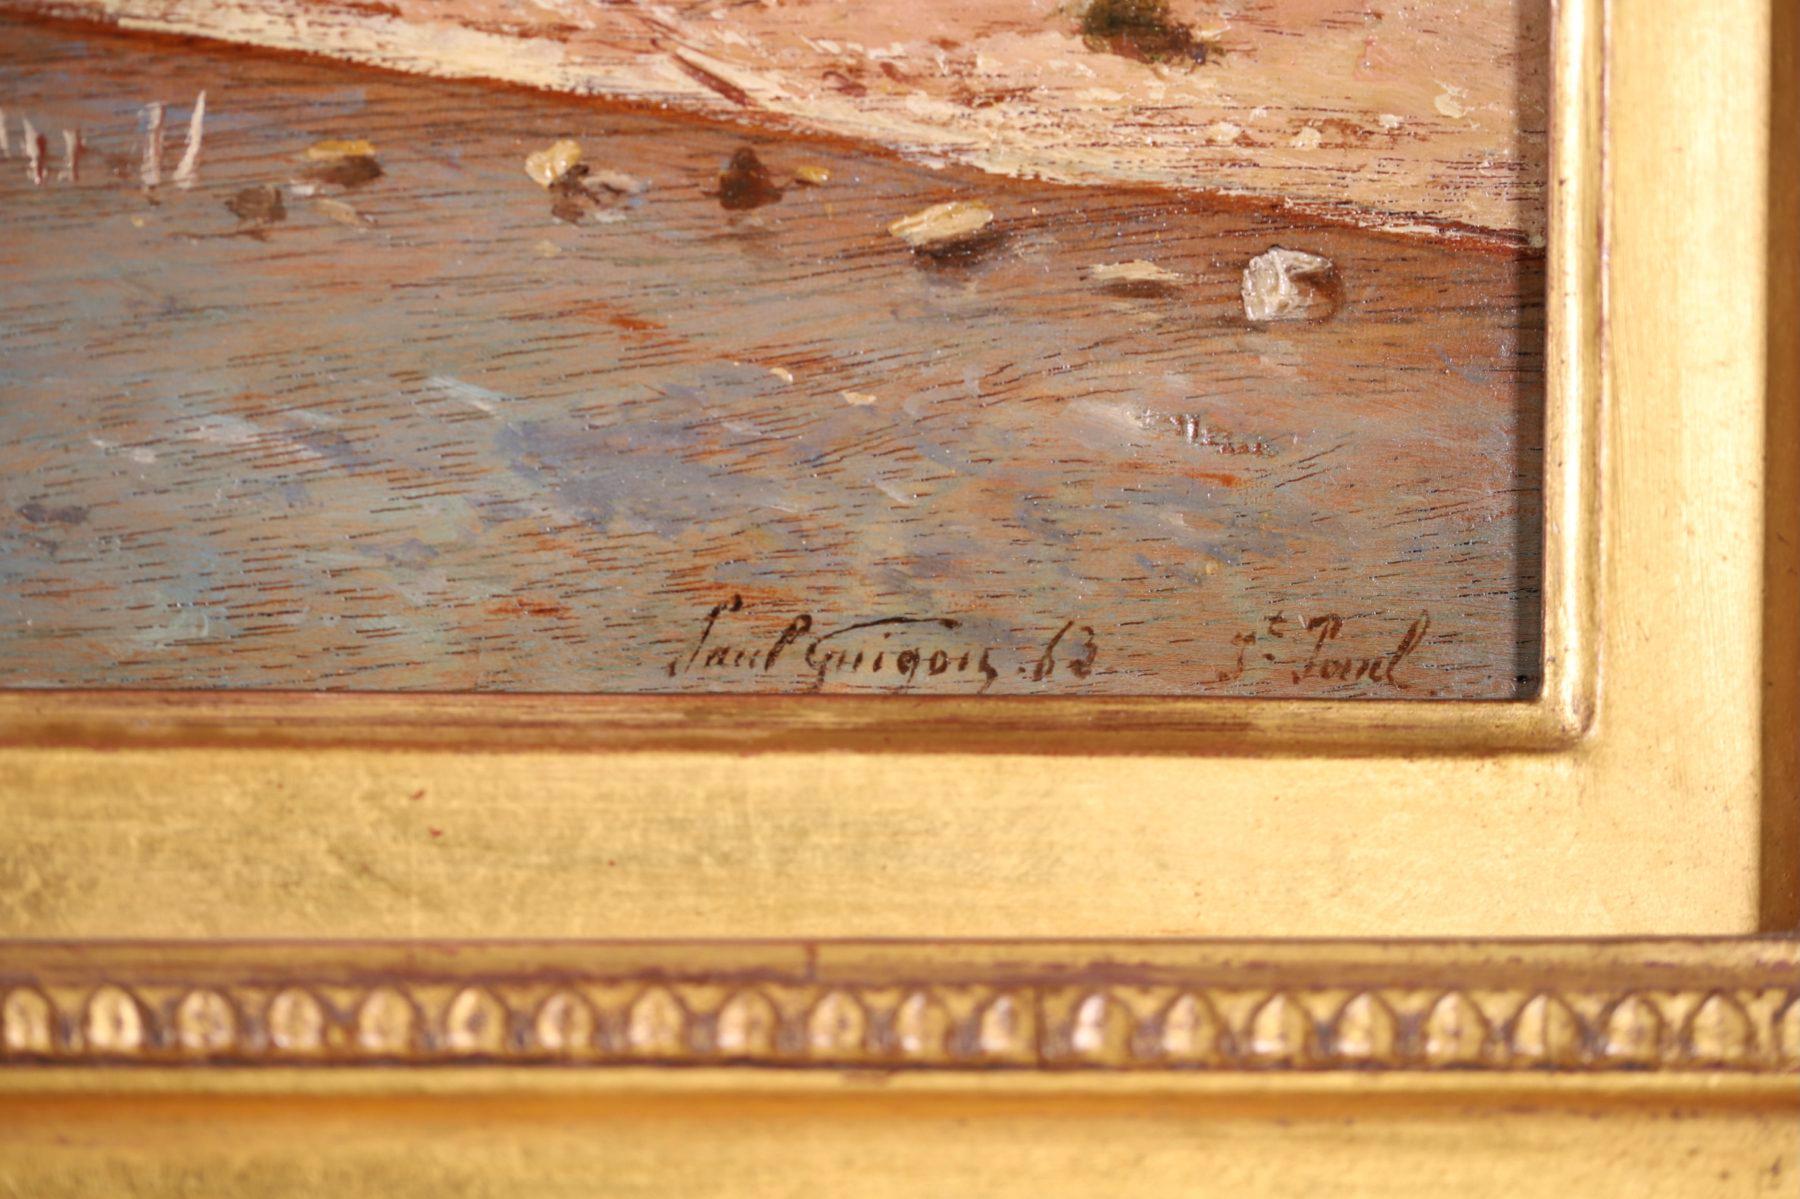 Signed impressionist riverscape oil on panel dated 1863 by sought after French painter Paul Camille Guigou. The piece depicts a view of the river in Saint-Paul-lès-Durance in Bouche-due-Rhone in the South of France on a warm summer's day. The blue